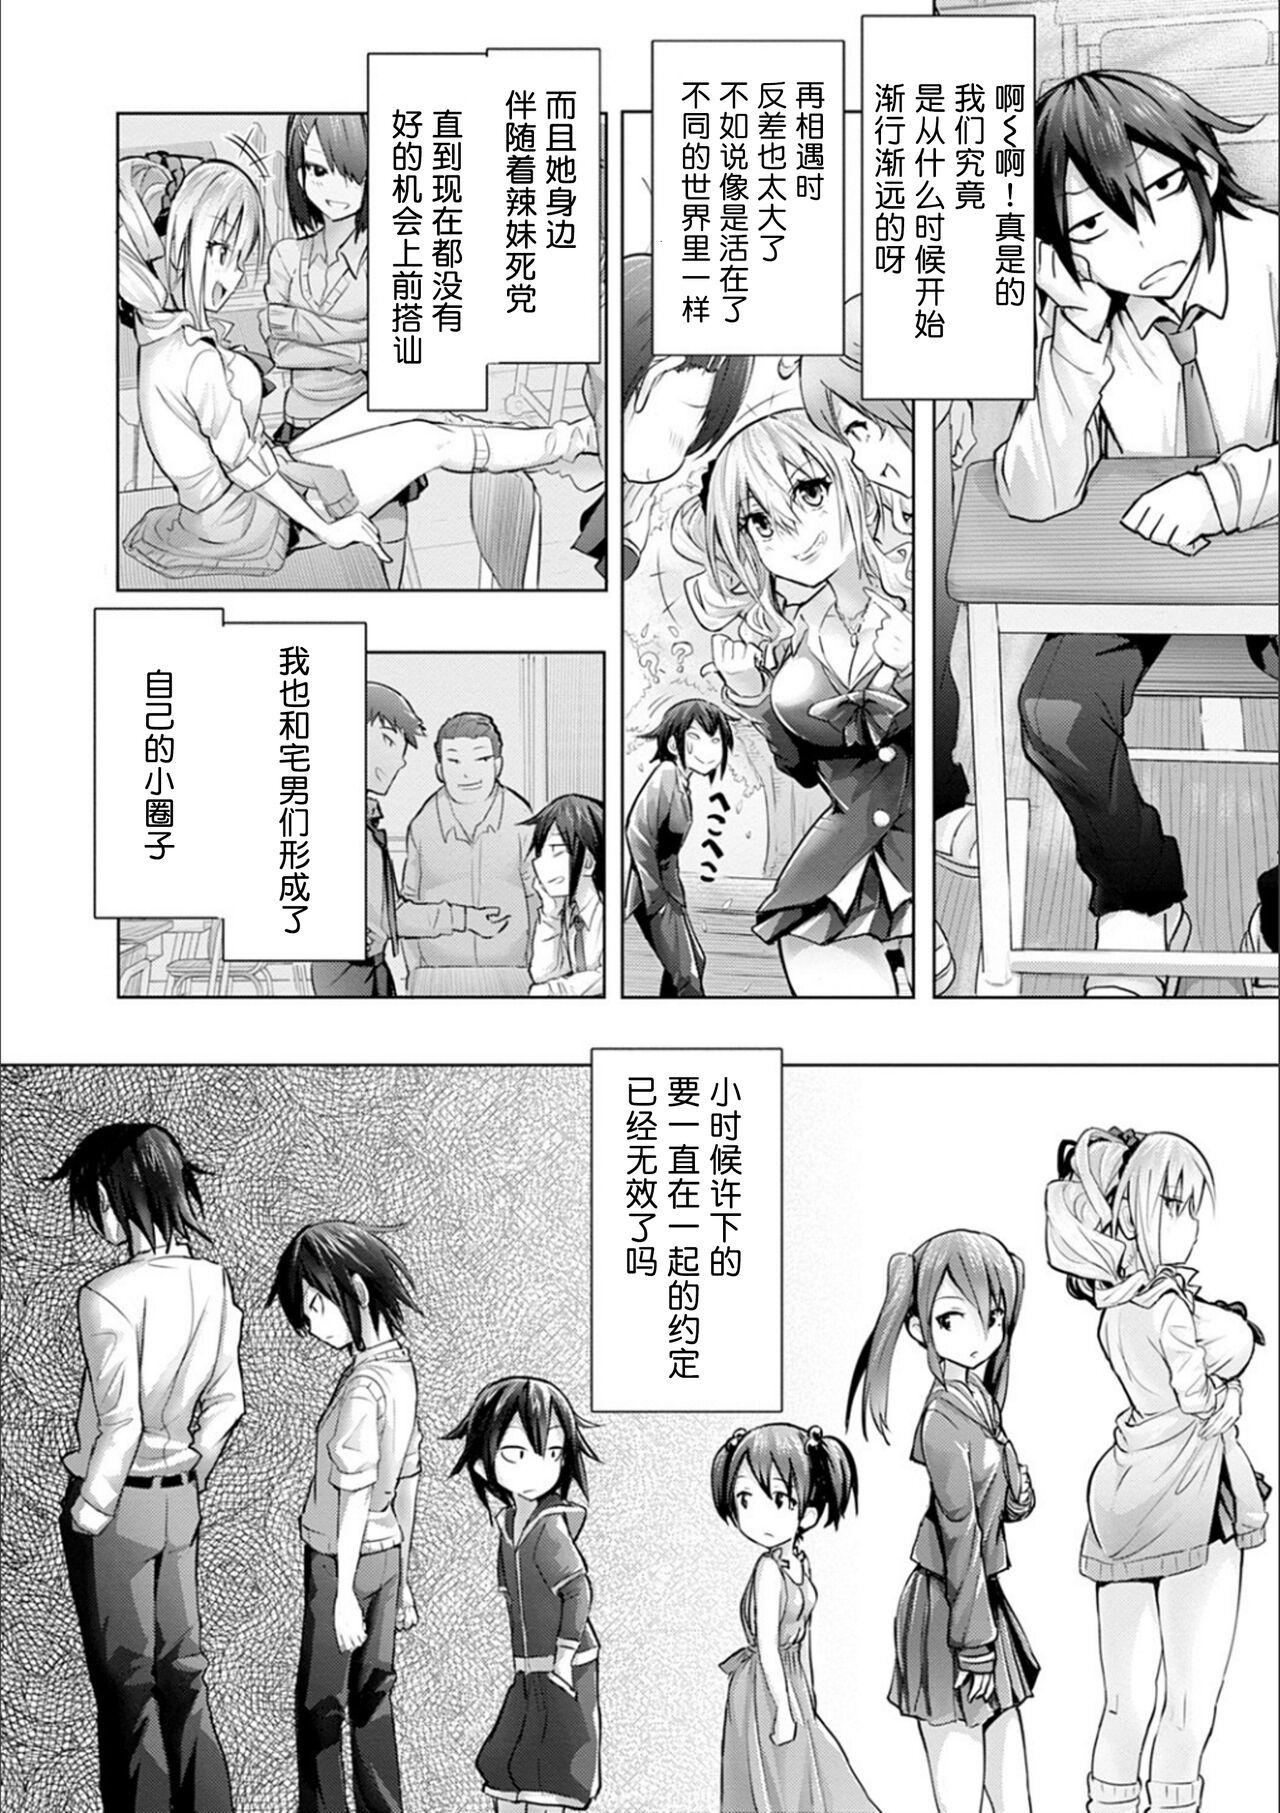 Old Vs Young Gal x Geek! | 辣妹x宅男 Couple Porn - Page 2